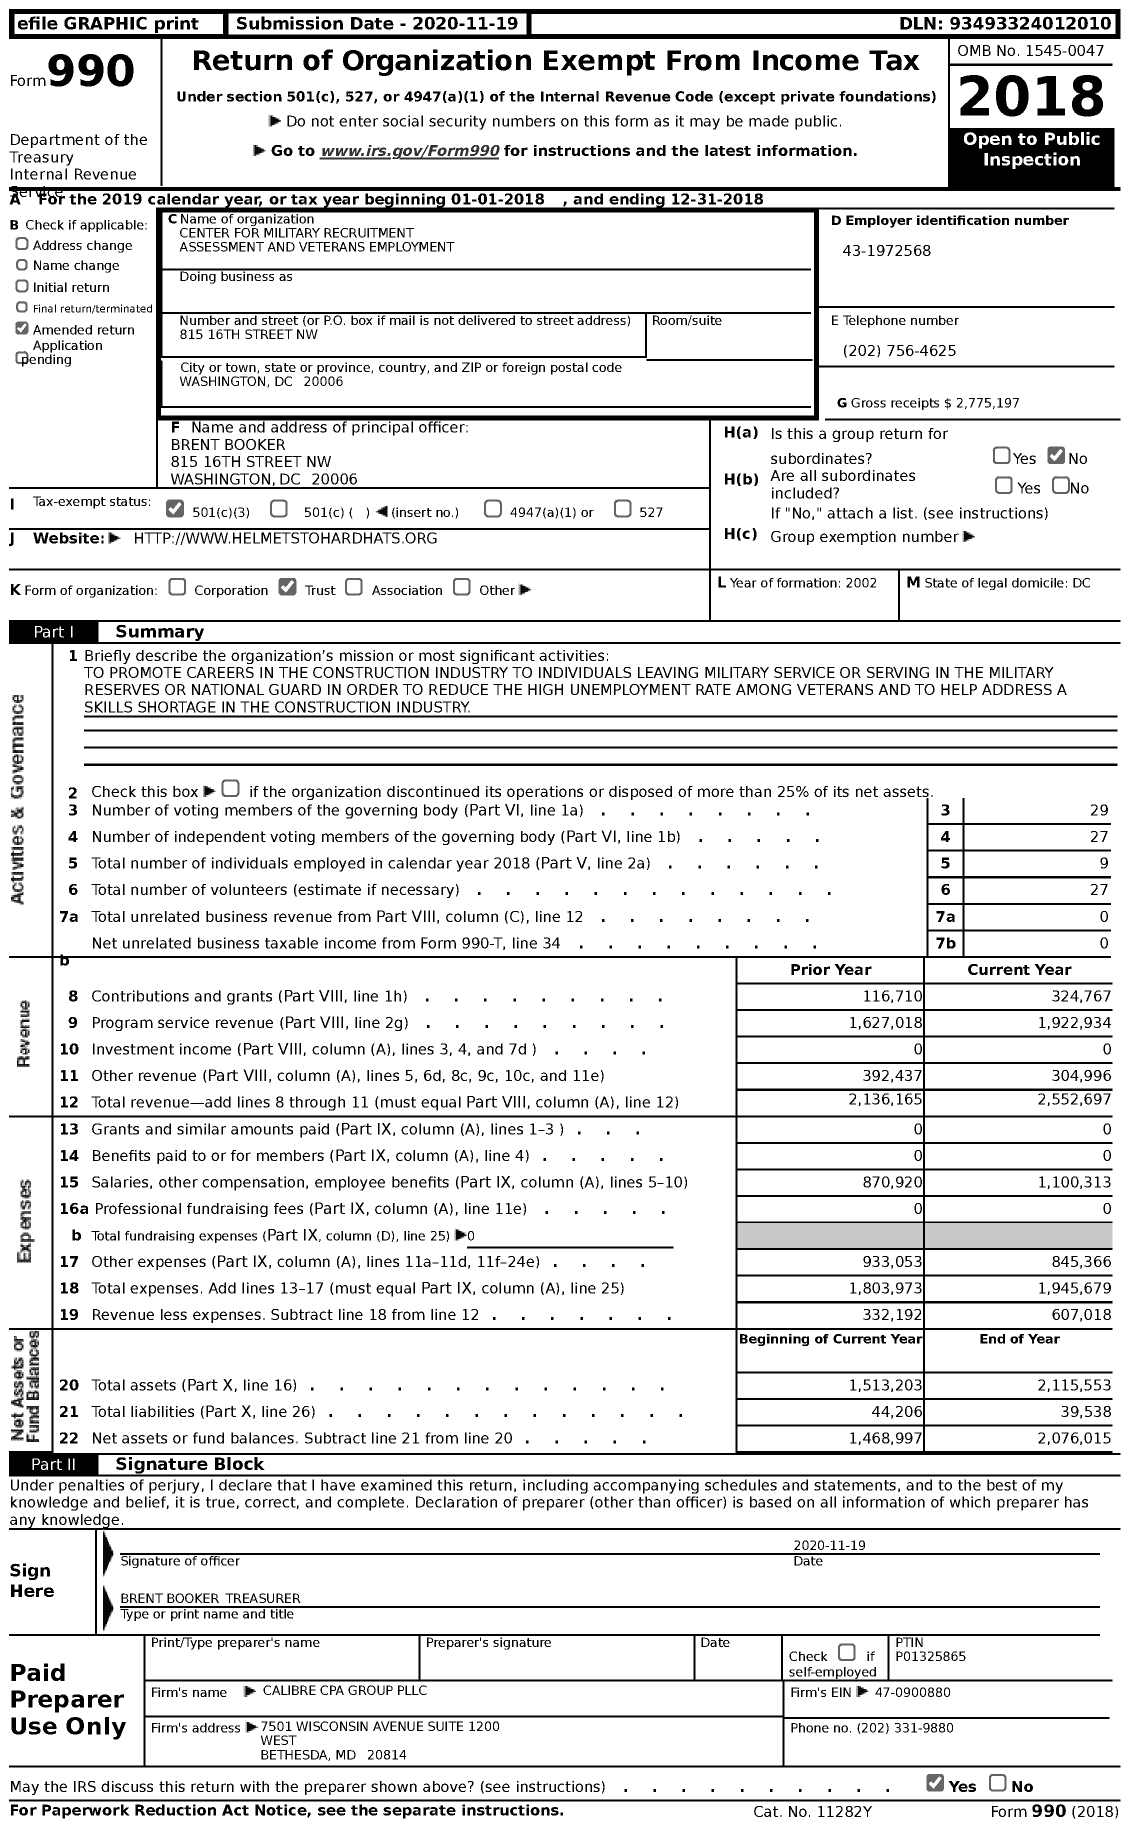 Image of first page of 2018 Form 990 for Center for Military Recruitment Assessment and Veterans Employment